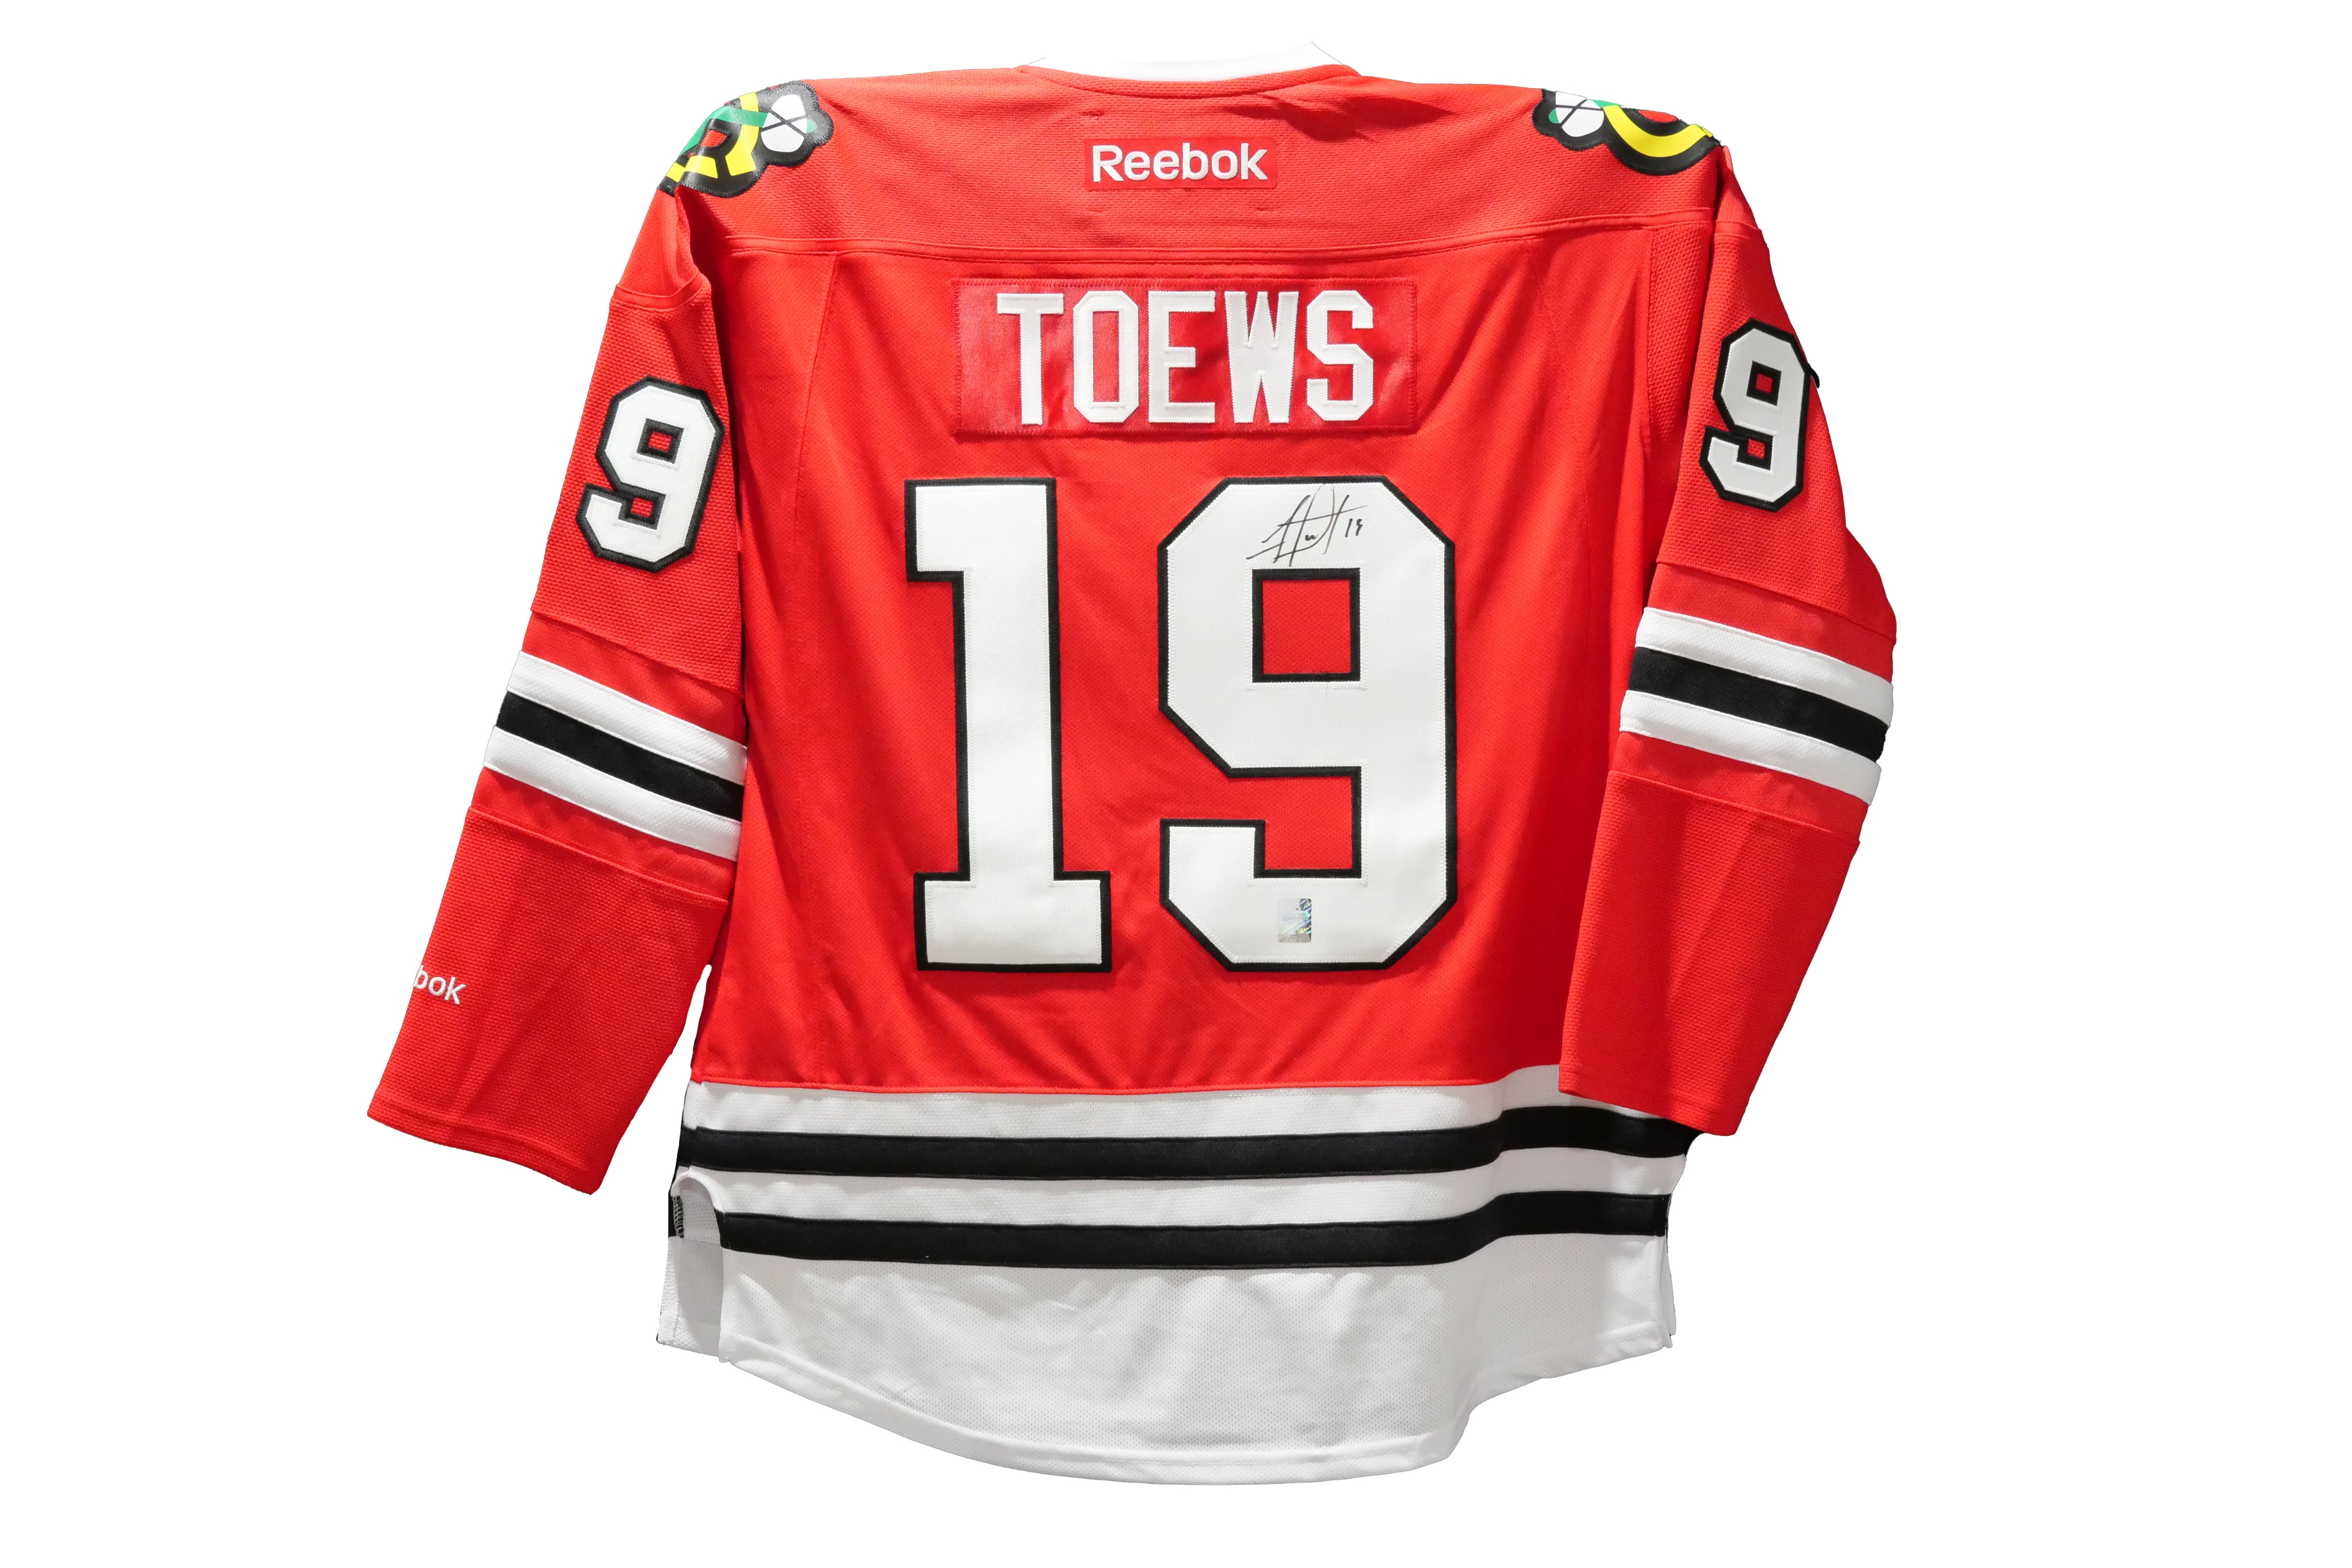 Jonathan Toews Authentic Autographed Chicago Blackhawks Home Jersey